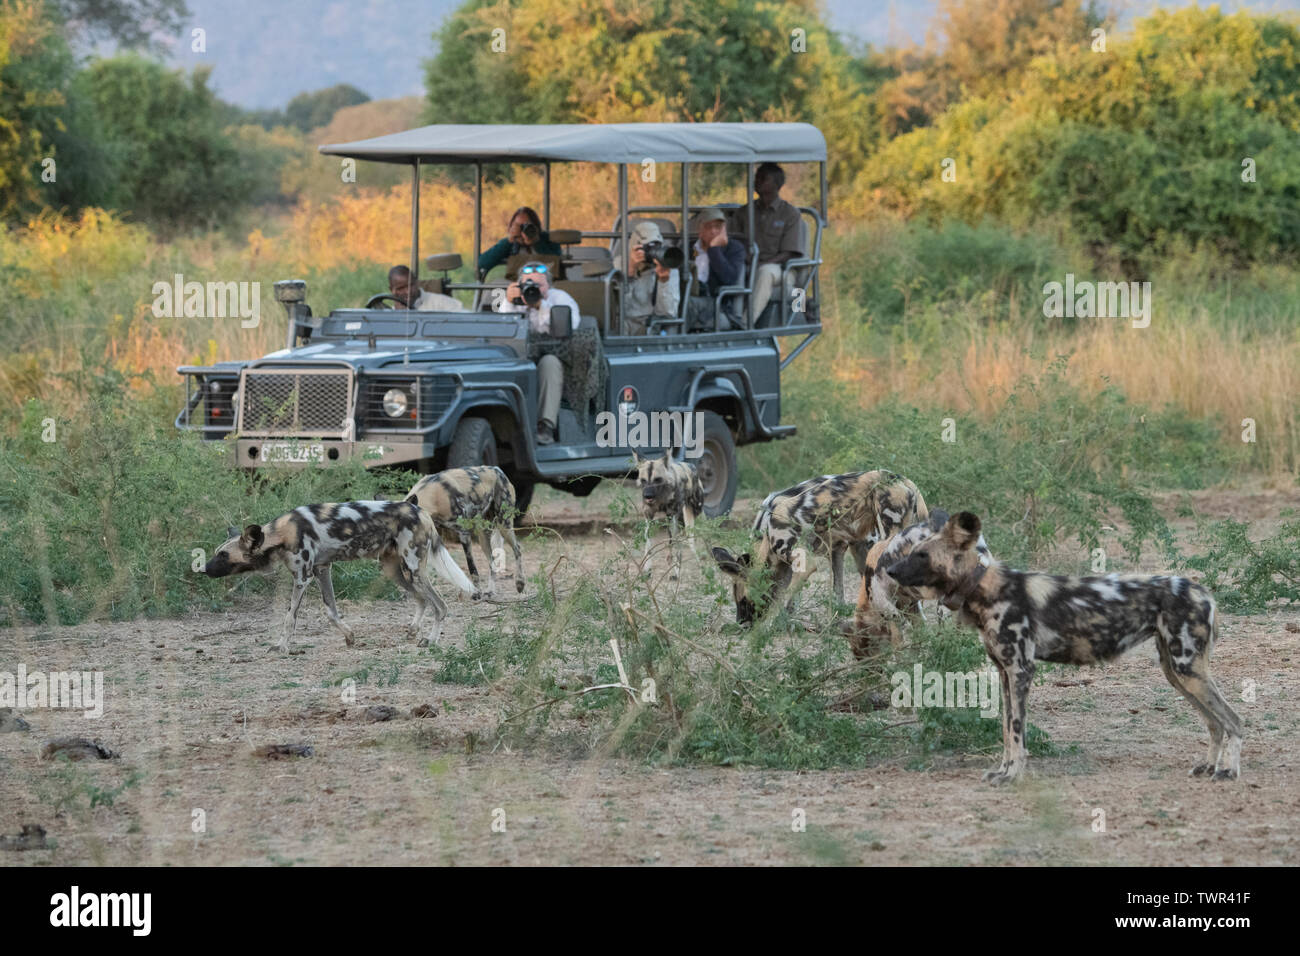 Africa, Zambia, South Luangwa National Park. Pack of African Painted Wolves, aka Painted Dogs or African Wild Dog, with safari jeep. Stock Photo